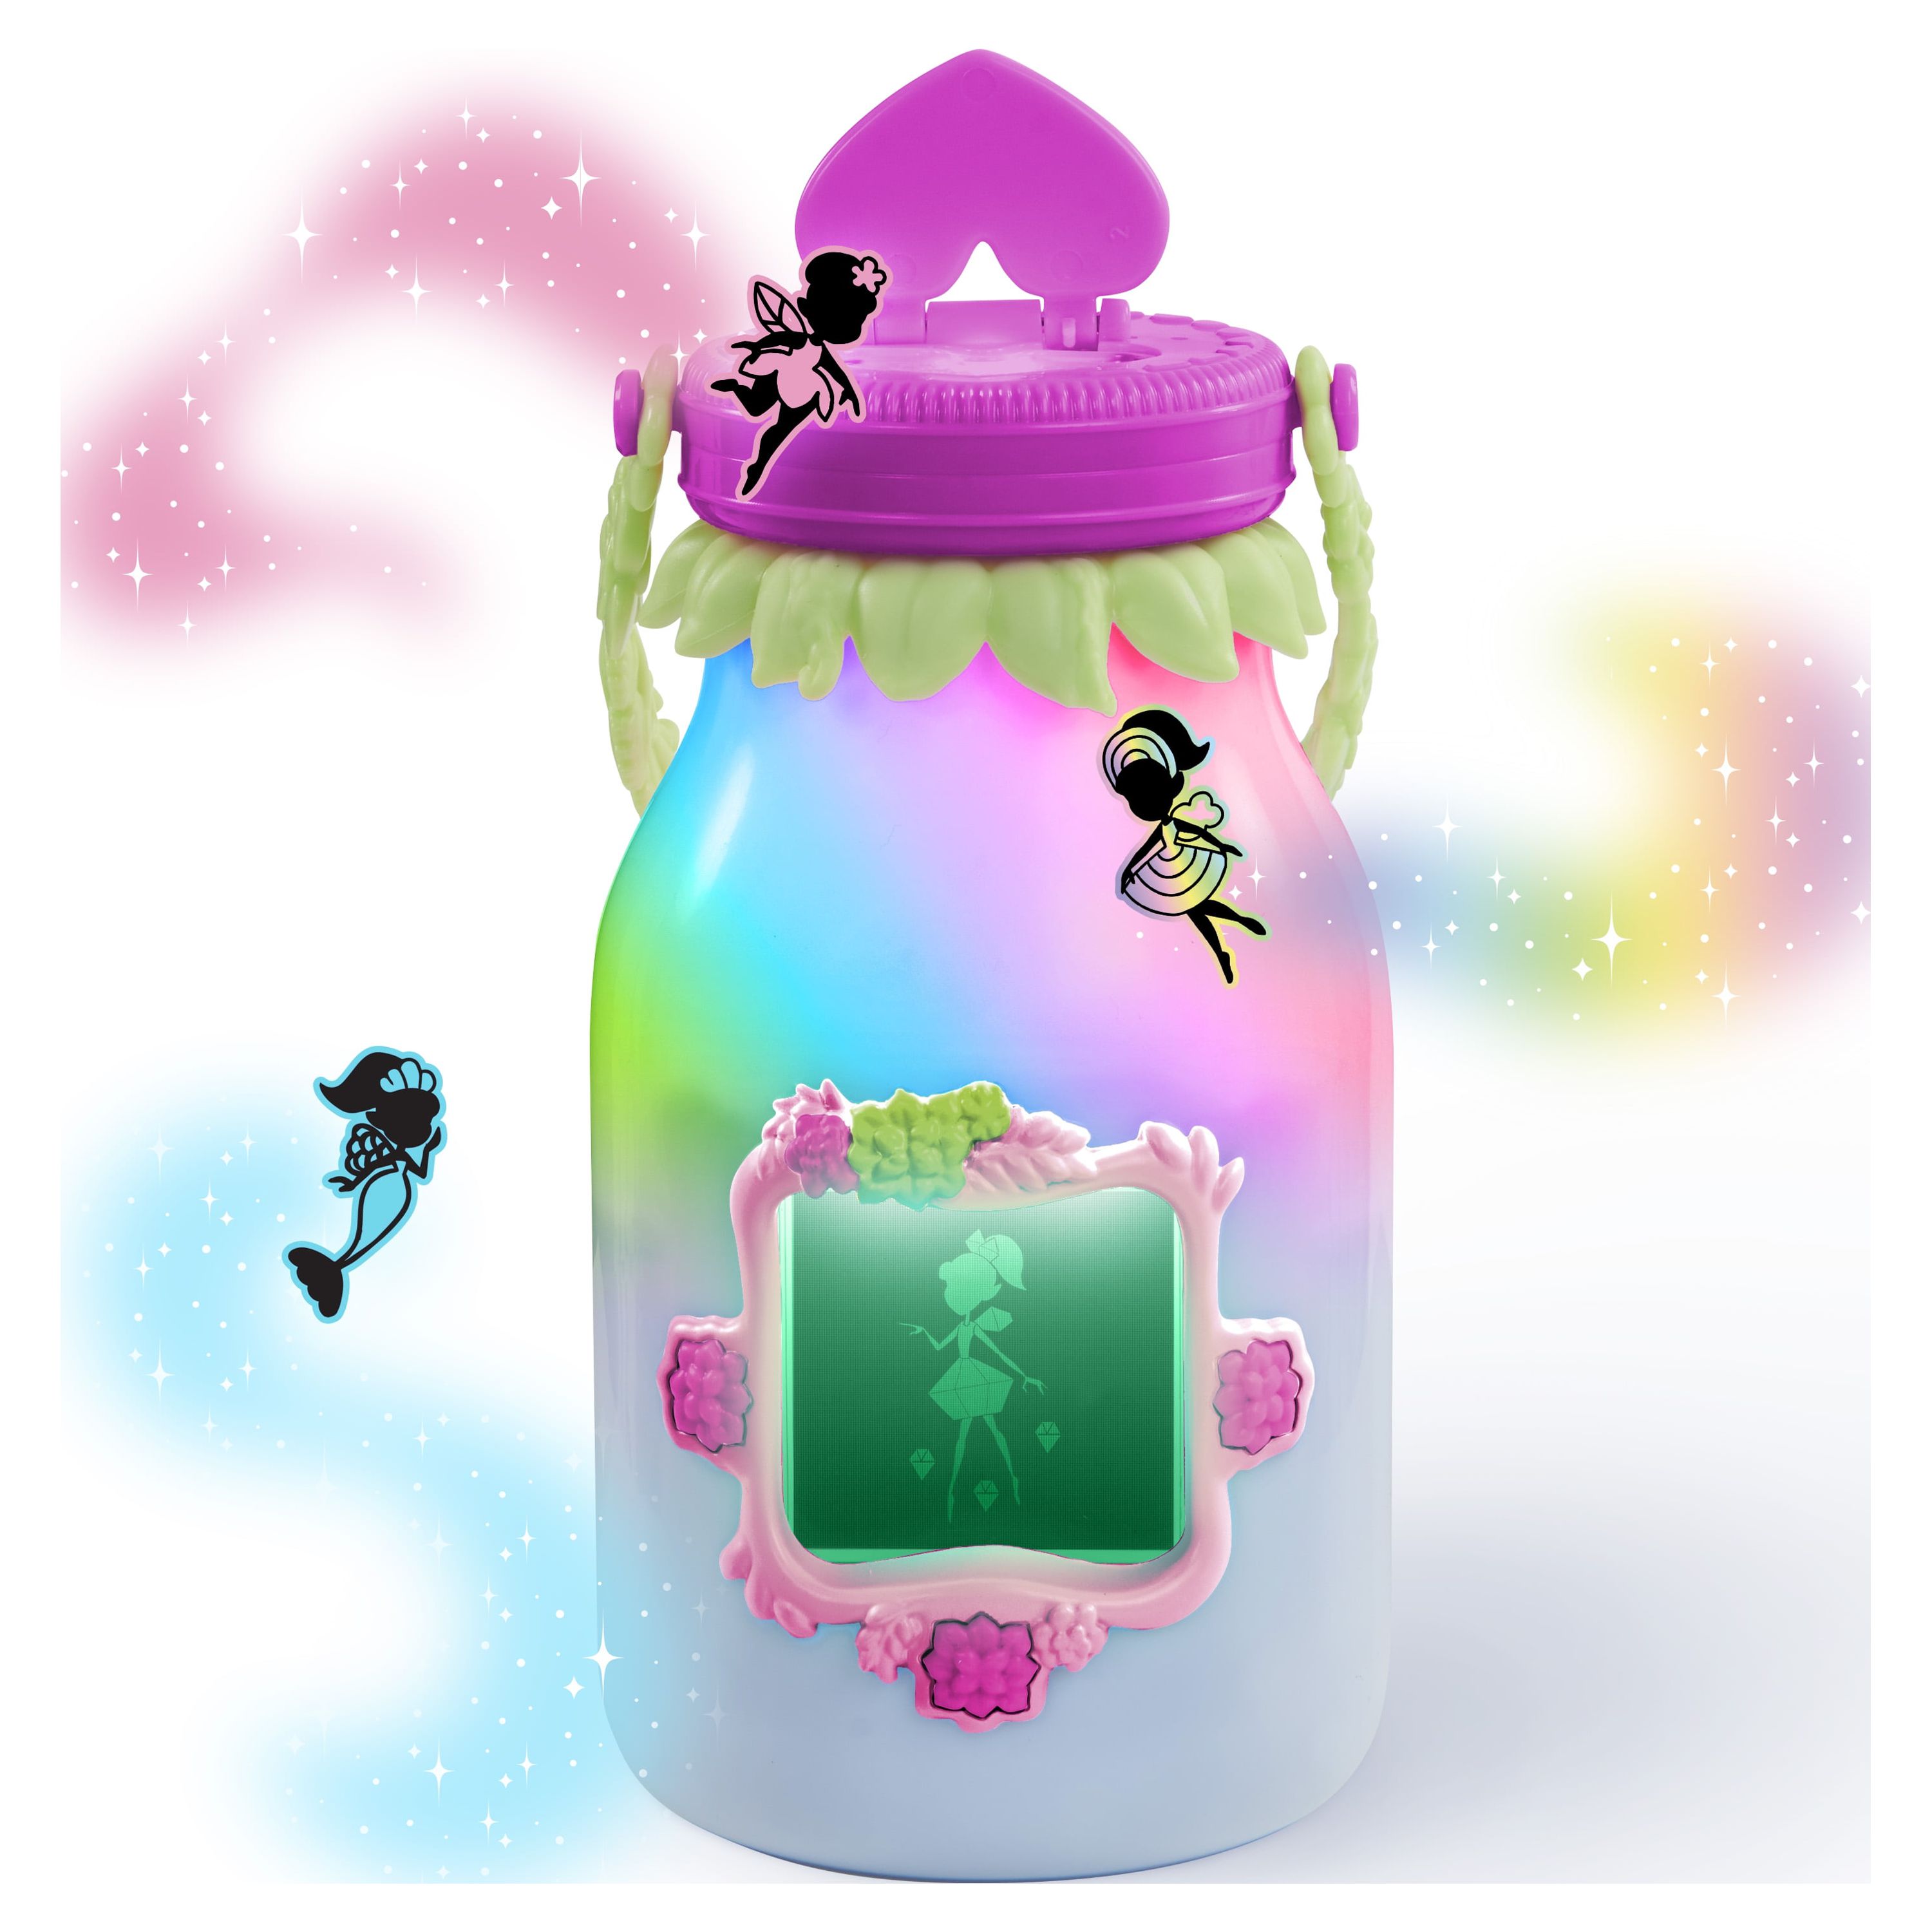 Got2Glow Fairy Finder by WowWee (Walmart Glow in the Dark Exclusive) - Electronic Pets - image 1 of 7